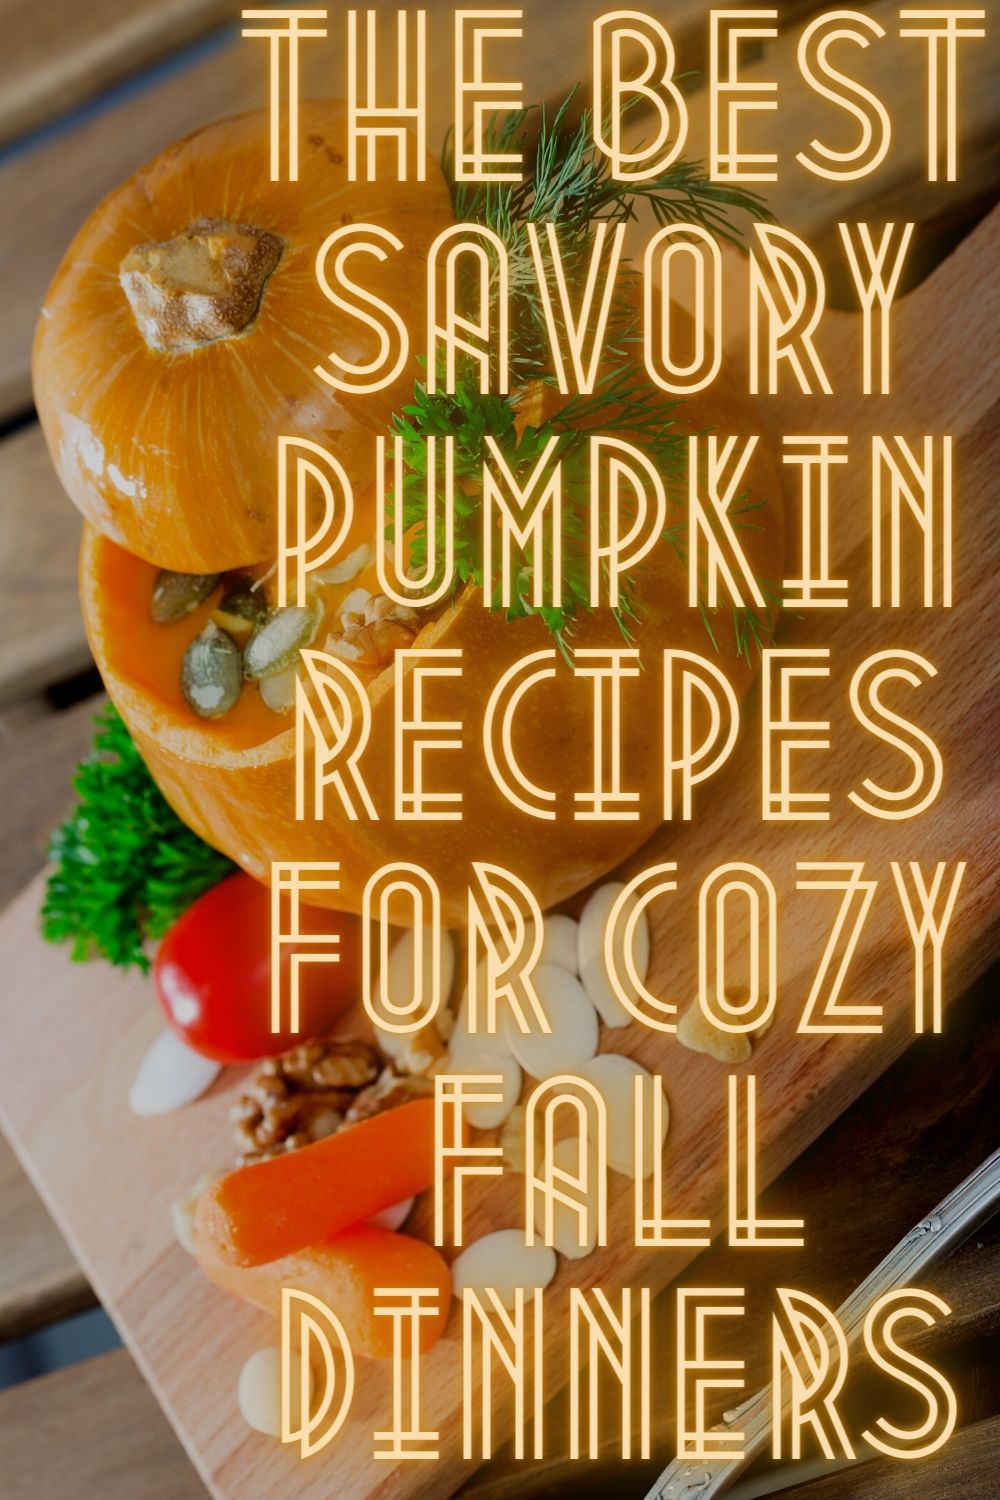 The Best Savory Pumpkin Recipes for Cozy Fall Dinners